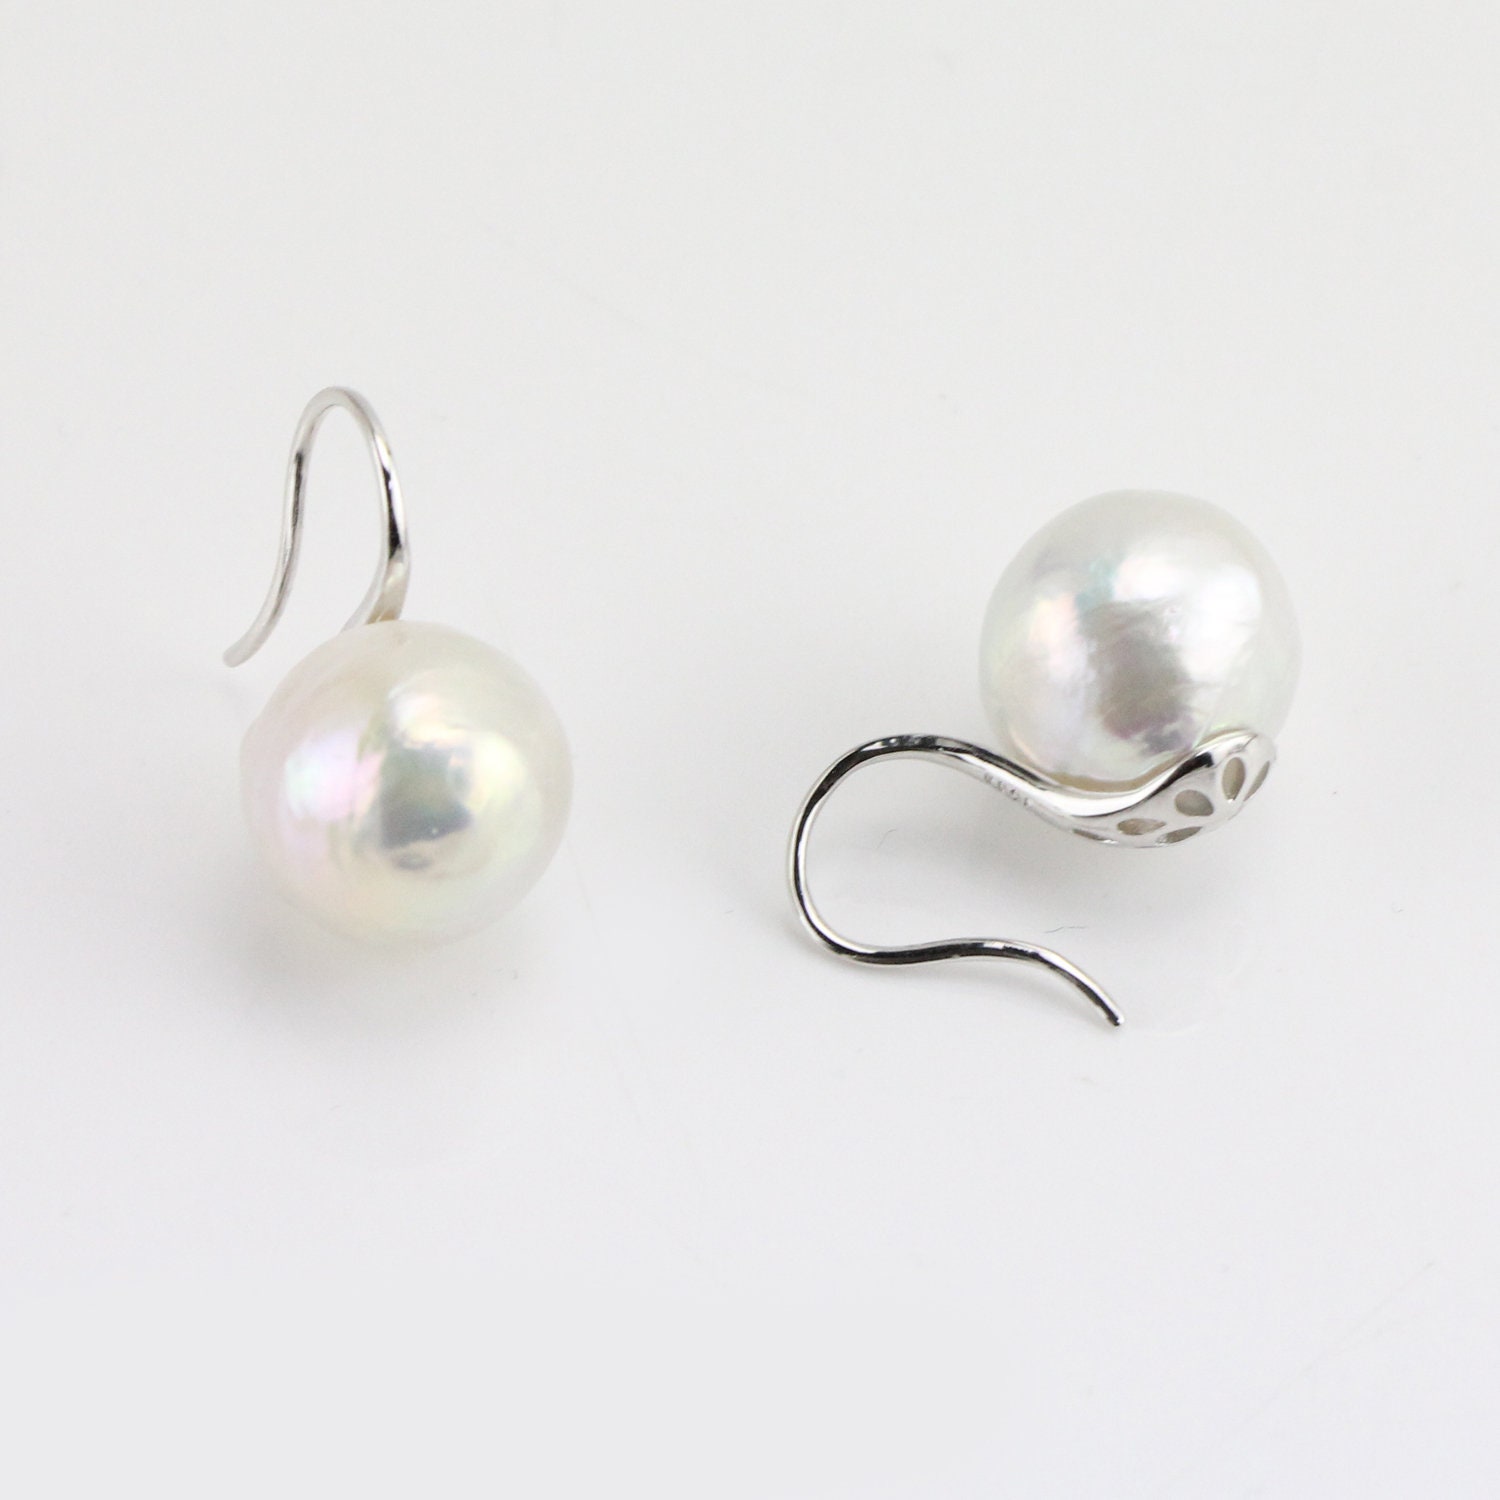 Details about   13-14mm white Baroque South Sea pearl earrings 18k hook personality accessories 